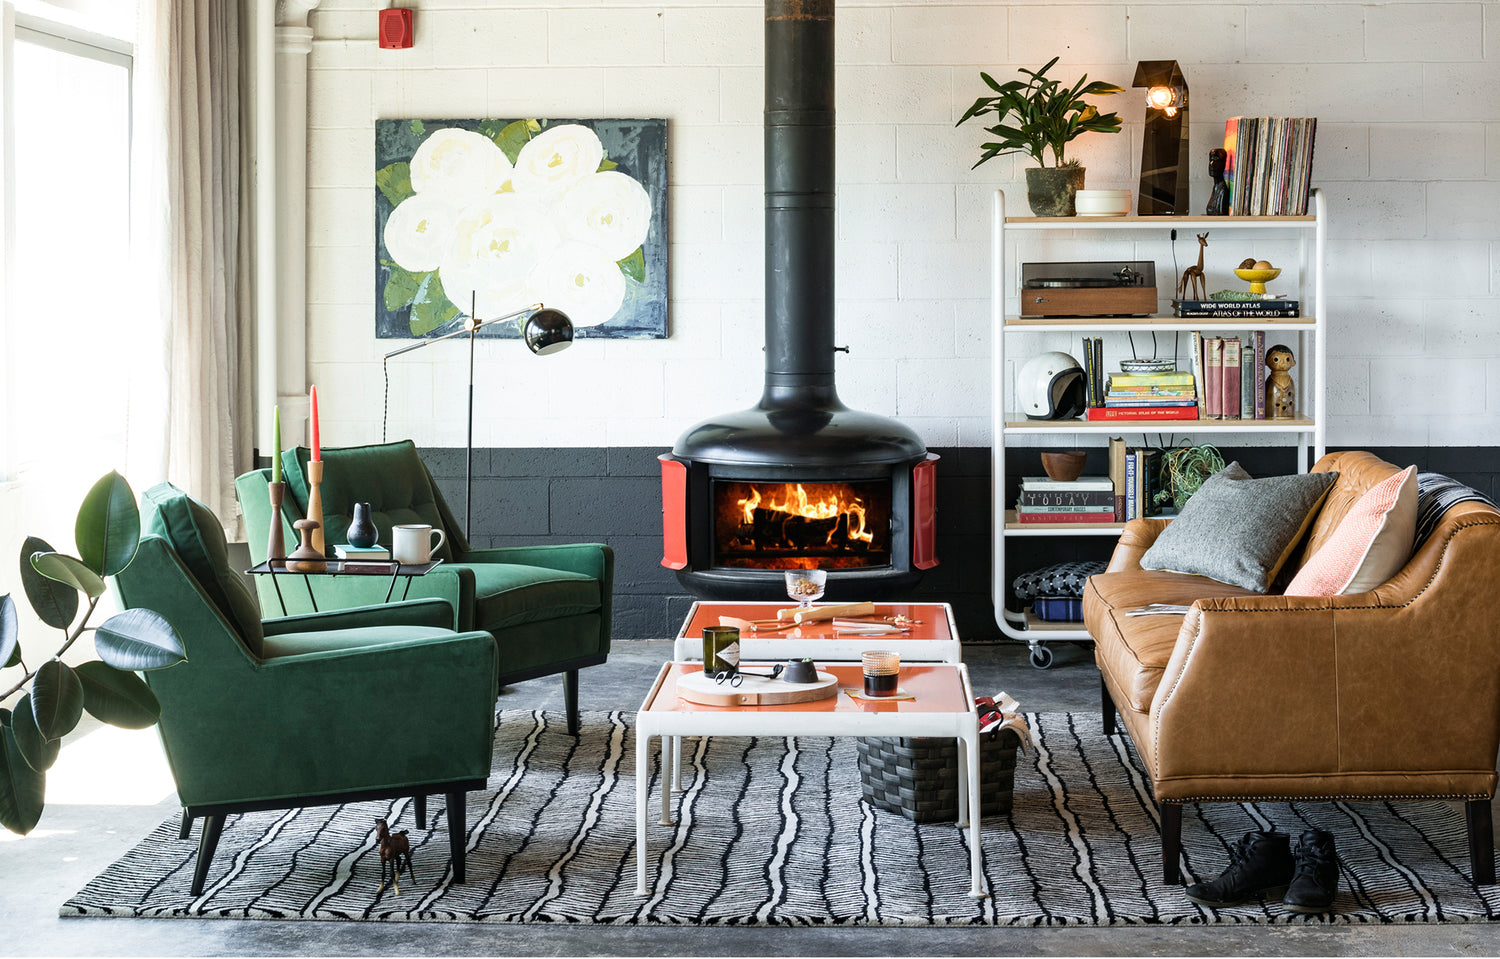 Stylish living room with a cozy fireplace, green armchairs, a brown leather sofa, a patterned rug, and a white coffee table. A bookshelf with plants and decor items stands against the wall. A large floral painting hangs above the fireplace. Sunlight filters in from the left.